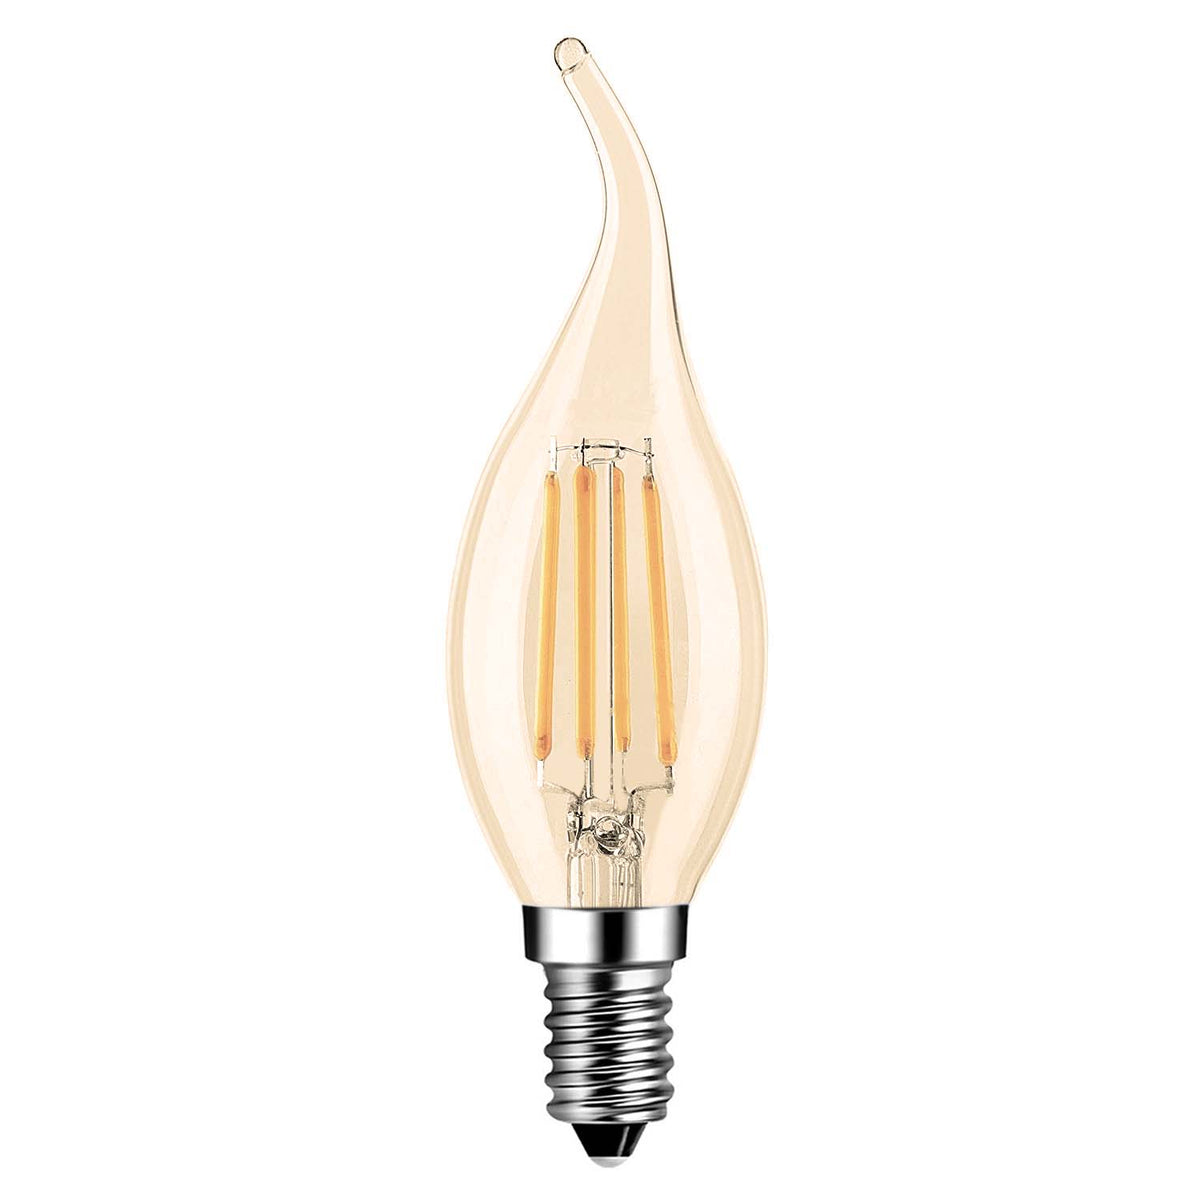 G.W.S LED Wholesale Filament LED Bulbs Candle (Amber) / E14 / Warm White (2700K) C35 Vintage Style Dimmable E14 4W LED Filament Flame Tip Candle Light Bulb